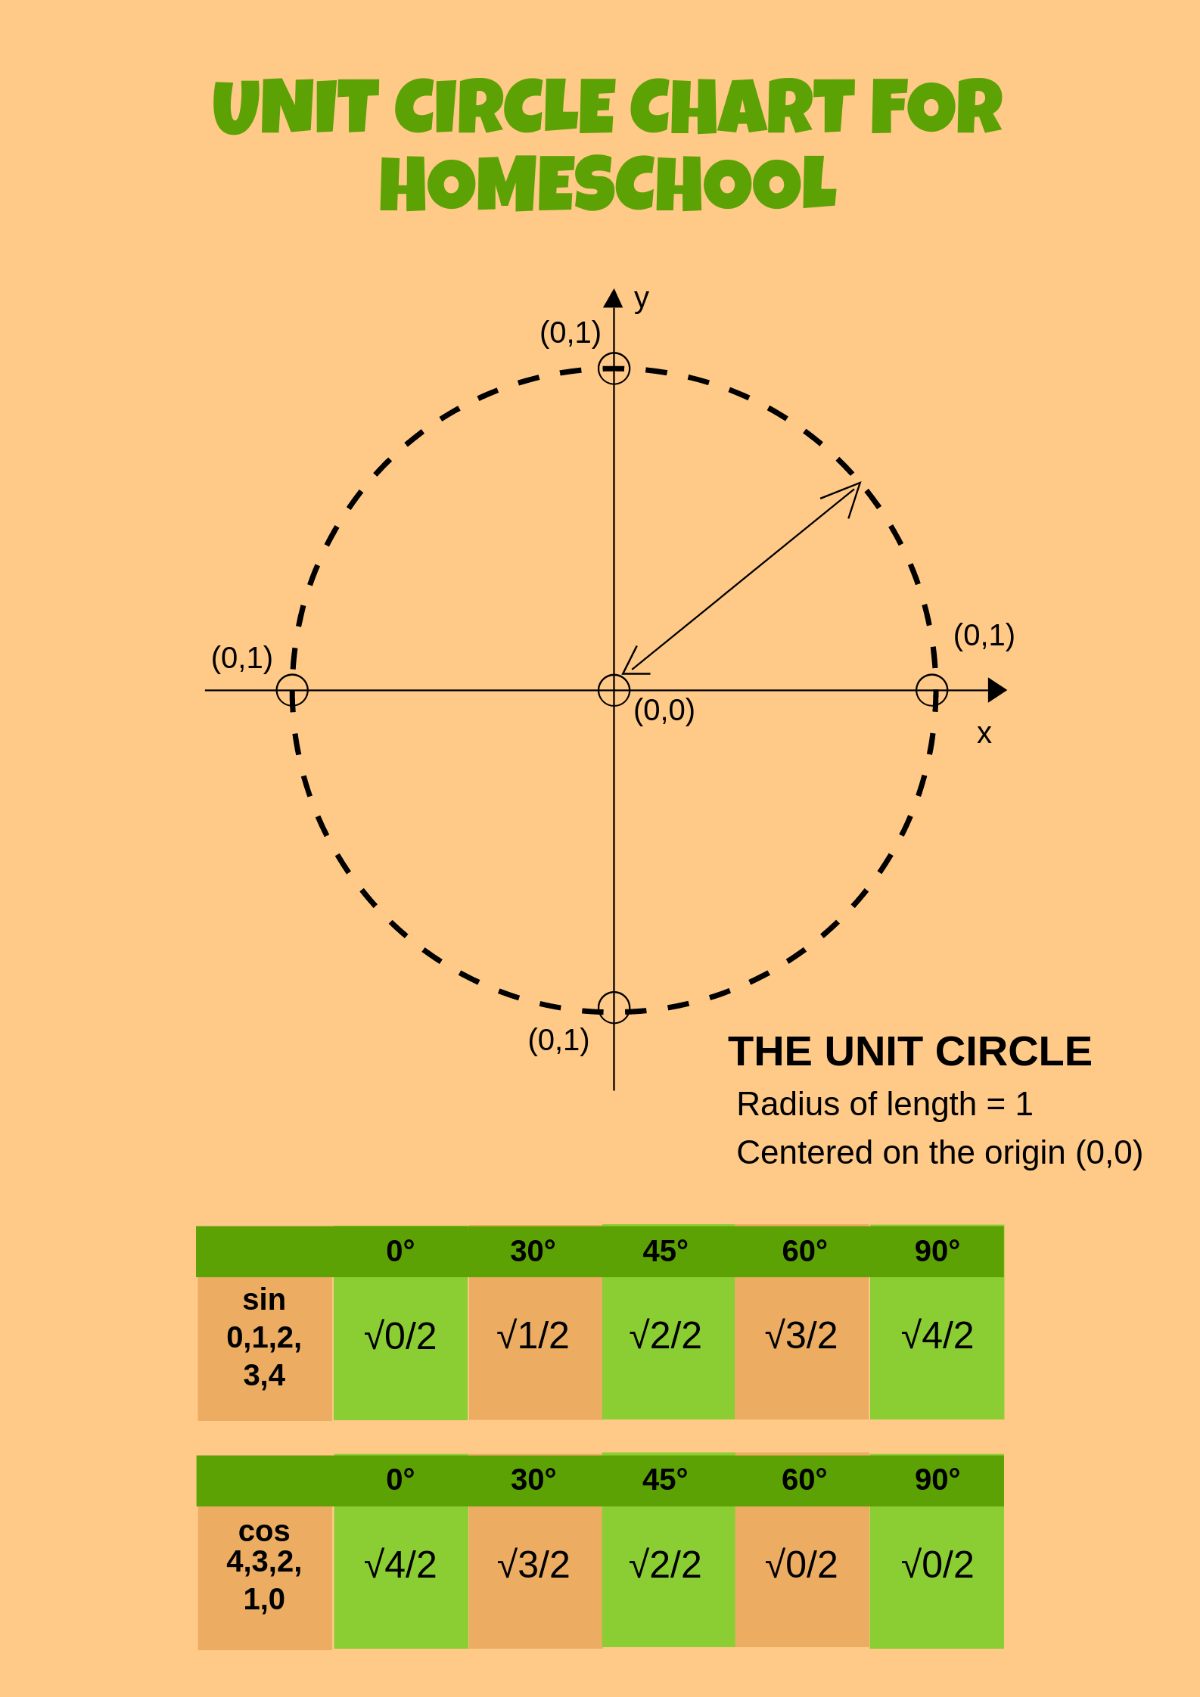 The Unit Circle Chart For Homeschool Template